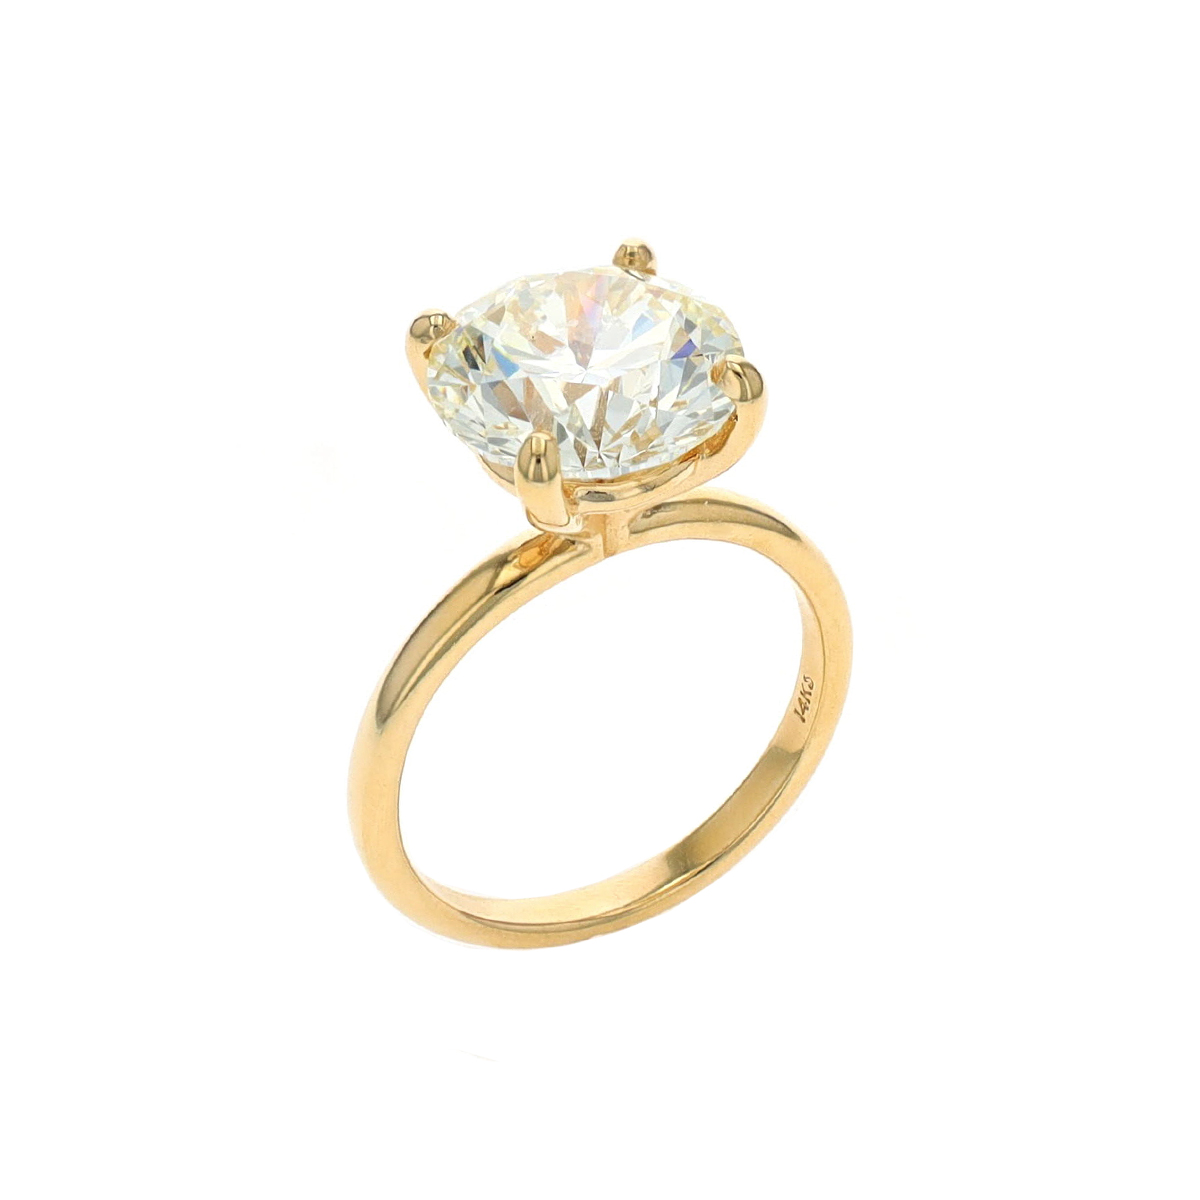 14K Yellow Gold 5.52 Carat Diamond Solitaire Engagement Ring